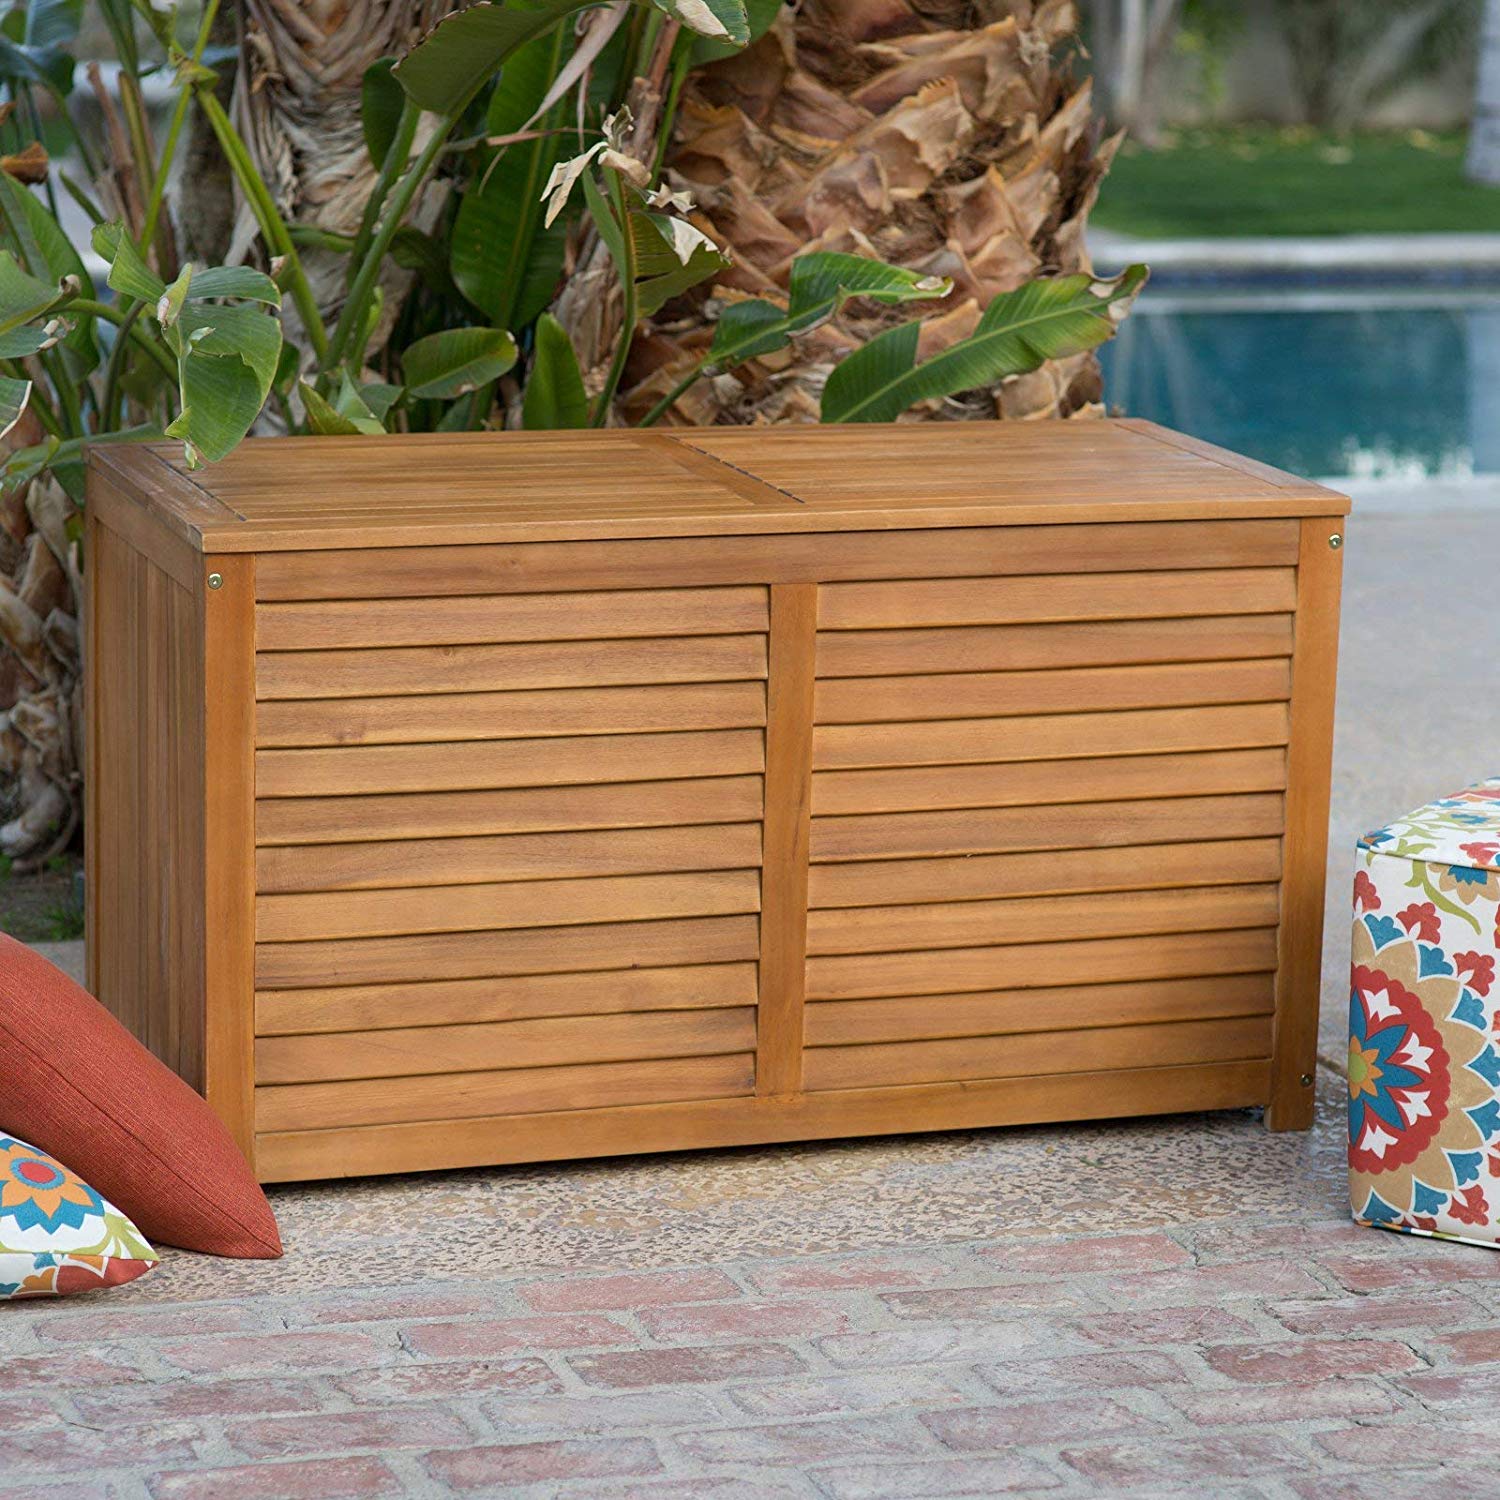 Outdoor Classic Natural Finish Wood 90 Gallon Deck Box Storage for Pool Patio 48L x 22W x 27H in.